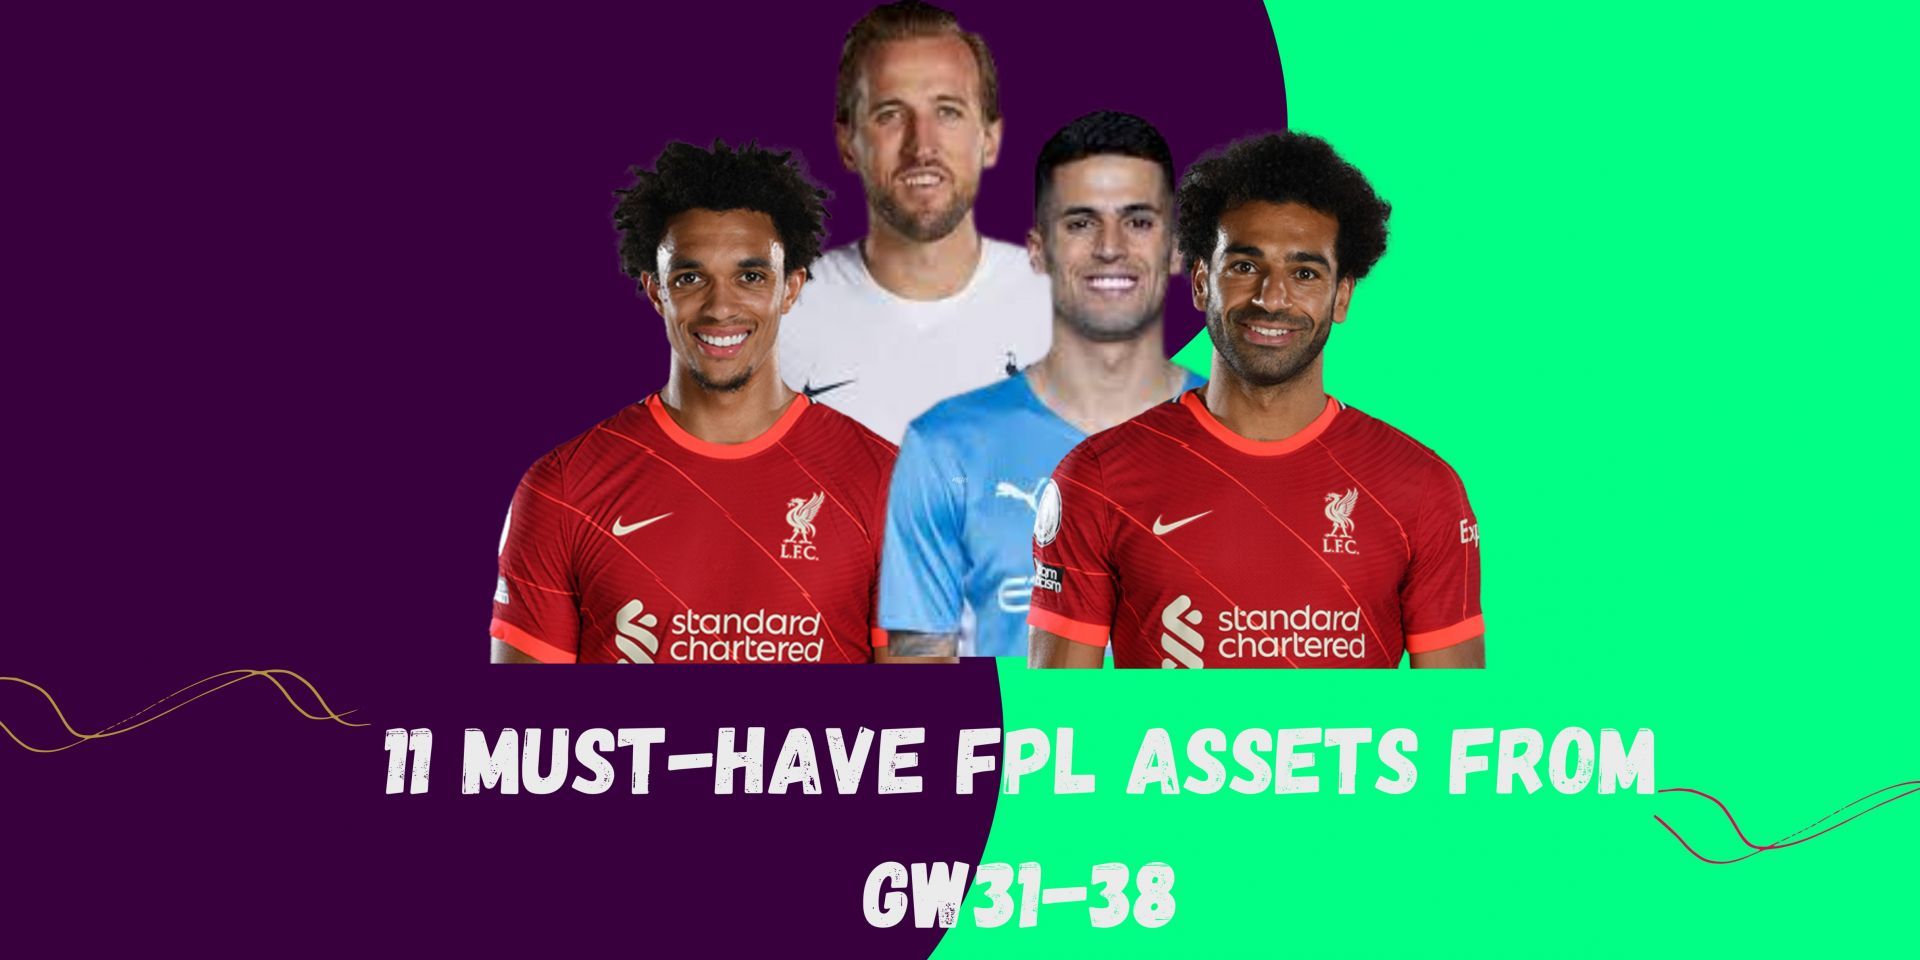 11 must-have FPL assets from GW31-38